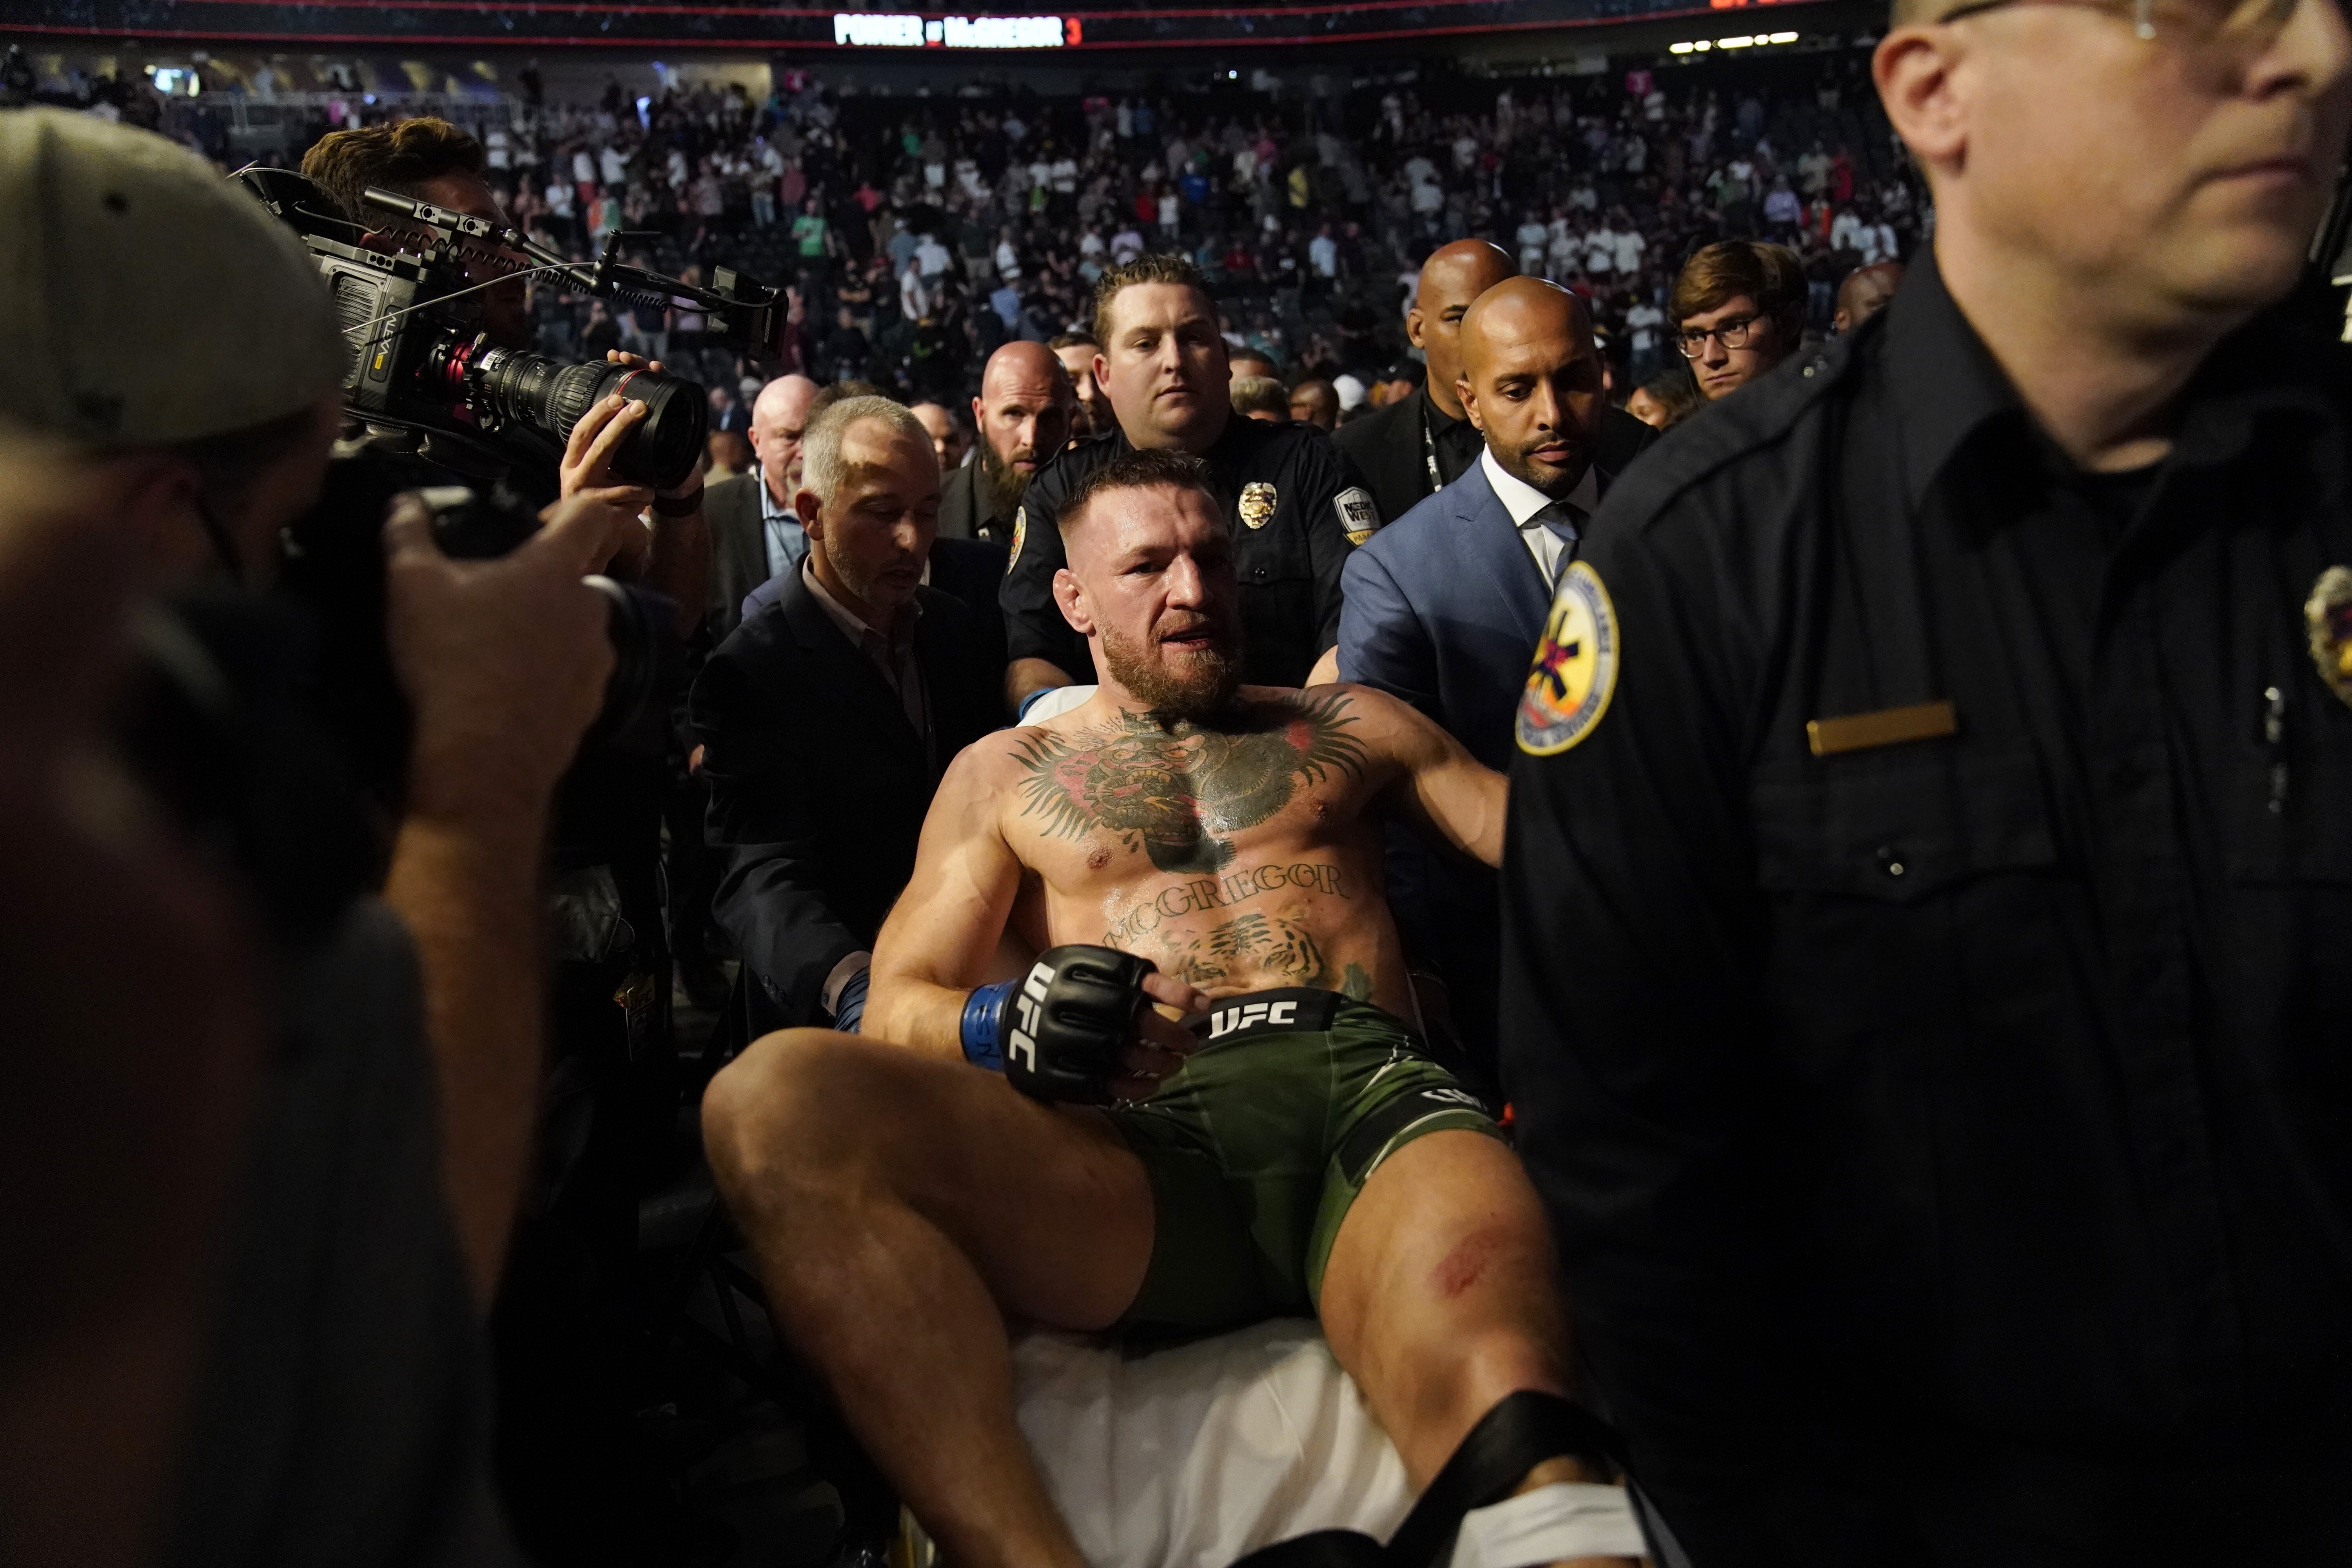 Conor McGregor is carried off on a stretcher after losing to Dustin Poirier in their UFC 264 lightweight main event. Photo: AP